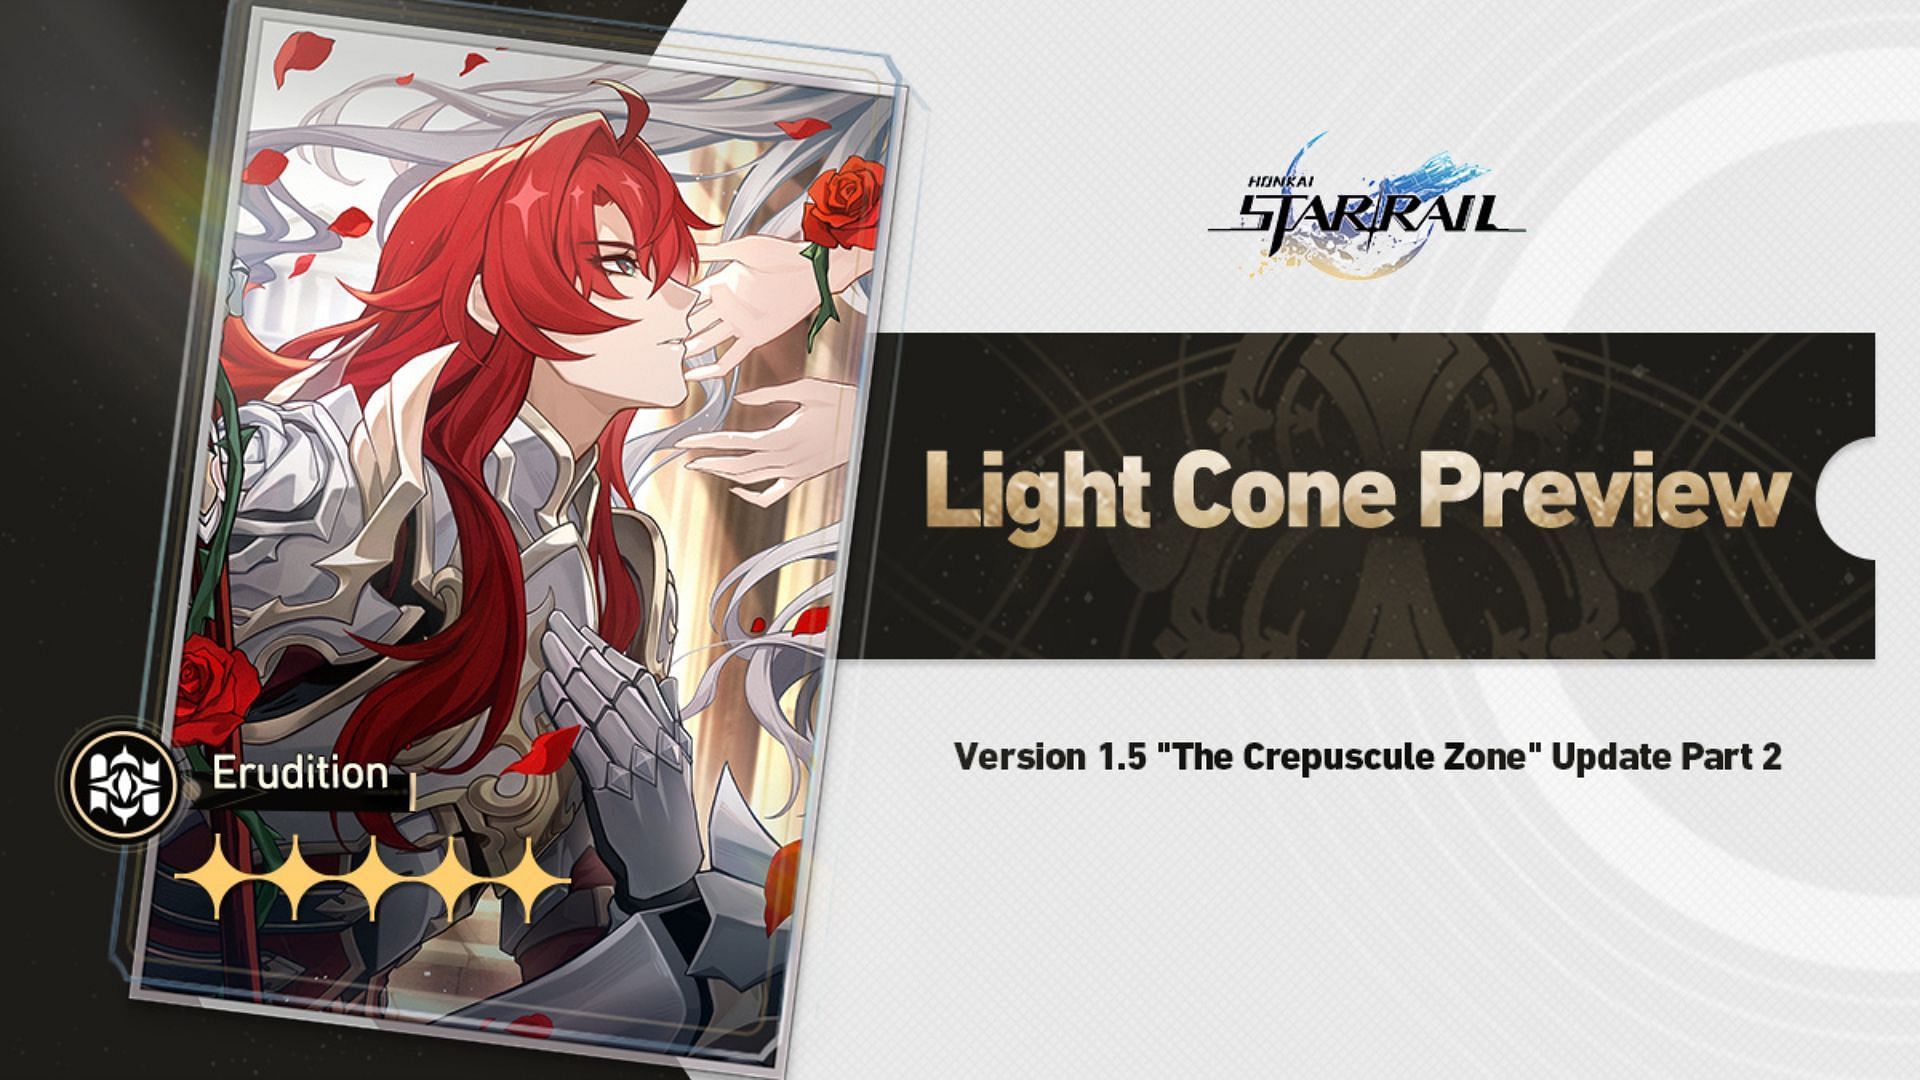 The official cover for version 1.5 Light Cone preview which features Argenti